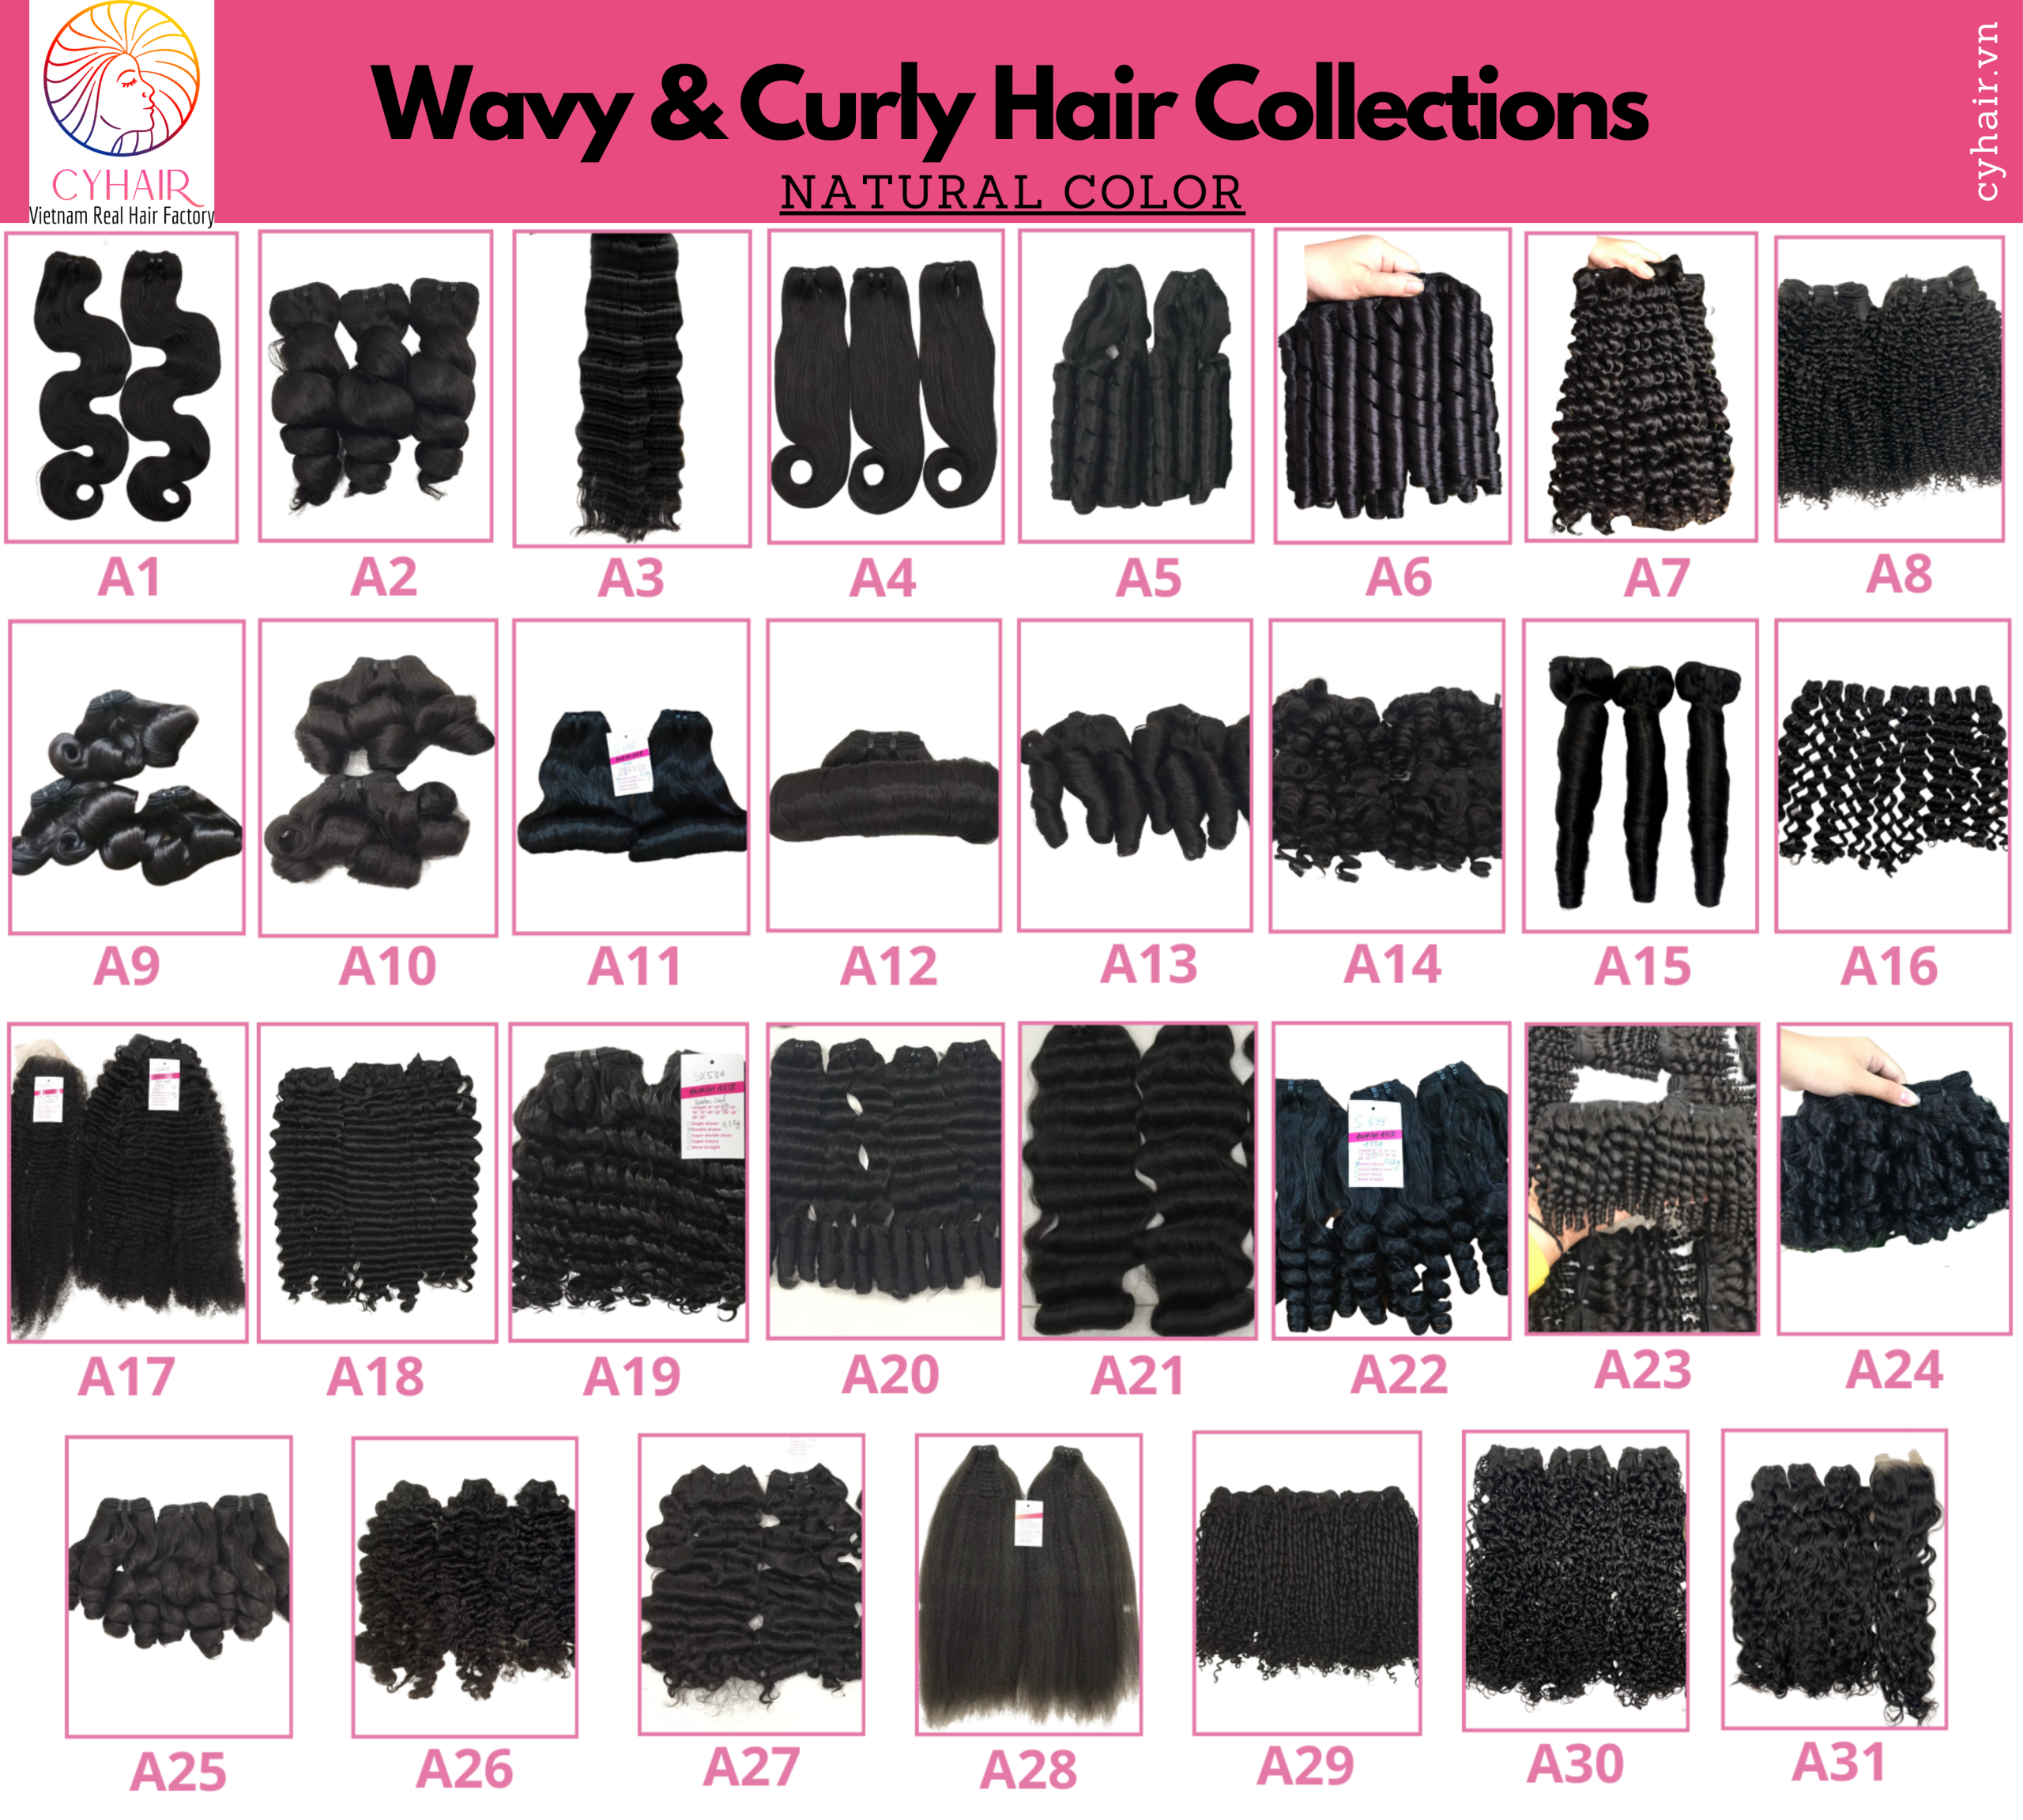 Natural Color Wavy and Curly Hair Collection